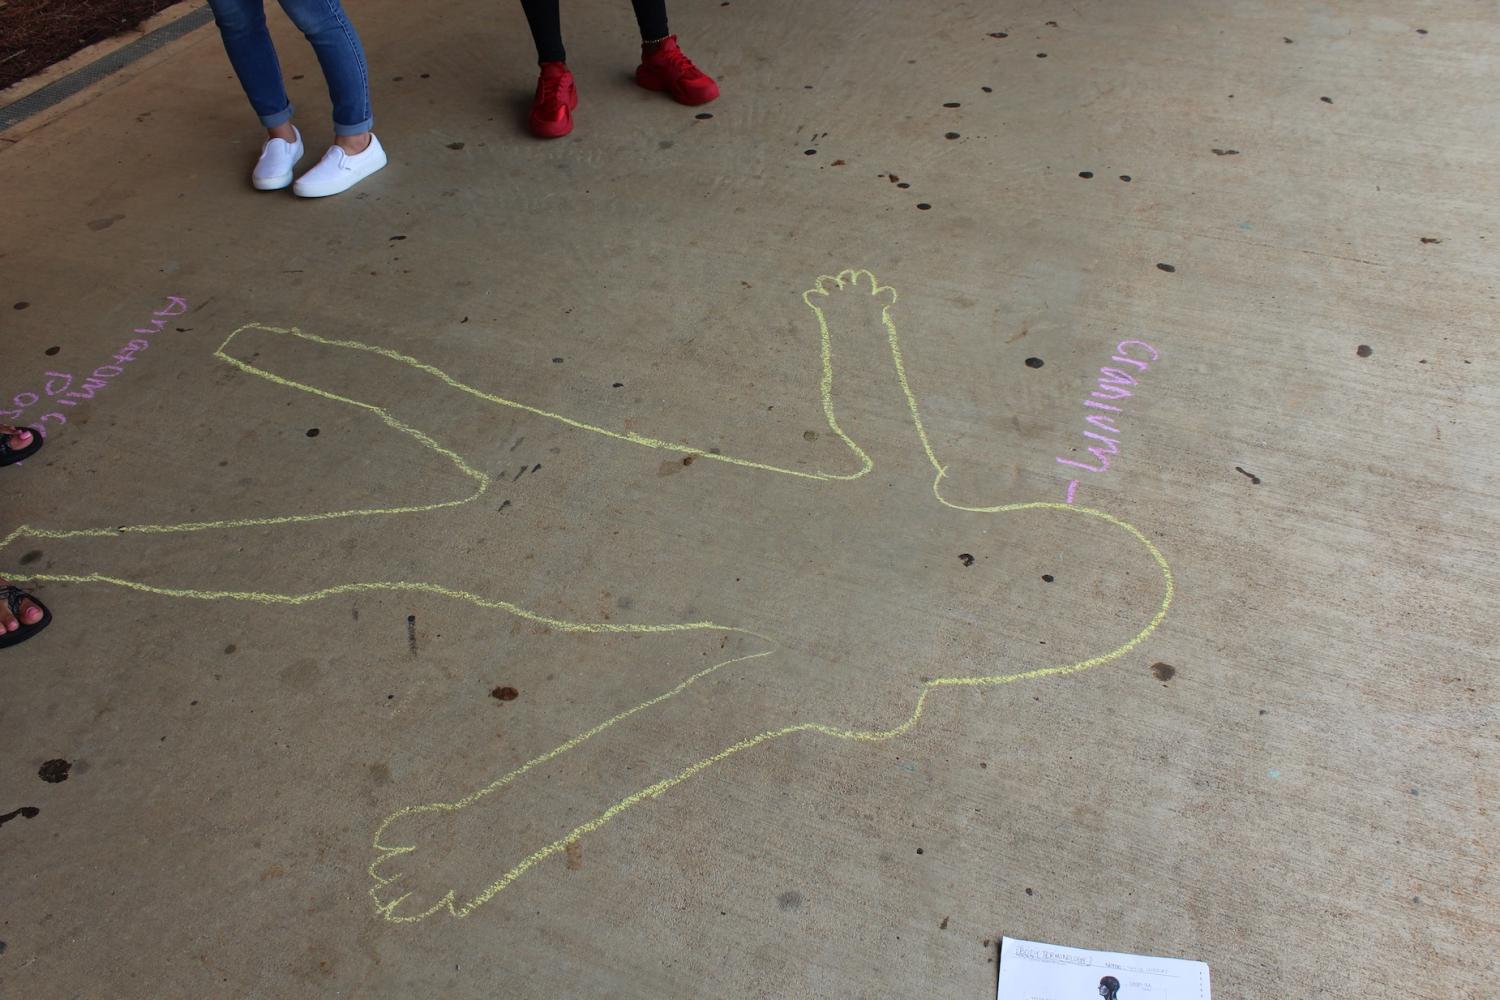 Today%2C+Mrs.+Adams%E2%80%99+third+period+anatomy+class+partnered+up+to+trace+and+label+the+body+system.+They+sketched+the+body+in+both+prone+and+anatomical+positions%2C+a+fundamental+concept+in+anatomy.+%E2%80%9CIts+a+fun+activity+and+it+helps+me+visualize+how+the+body+works%2C%E2%80%9D+junior+Moya+Perez+said.++